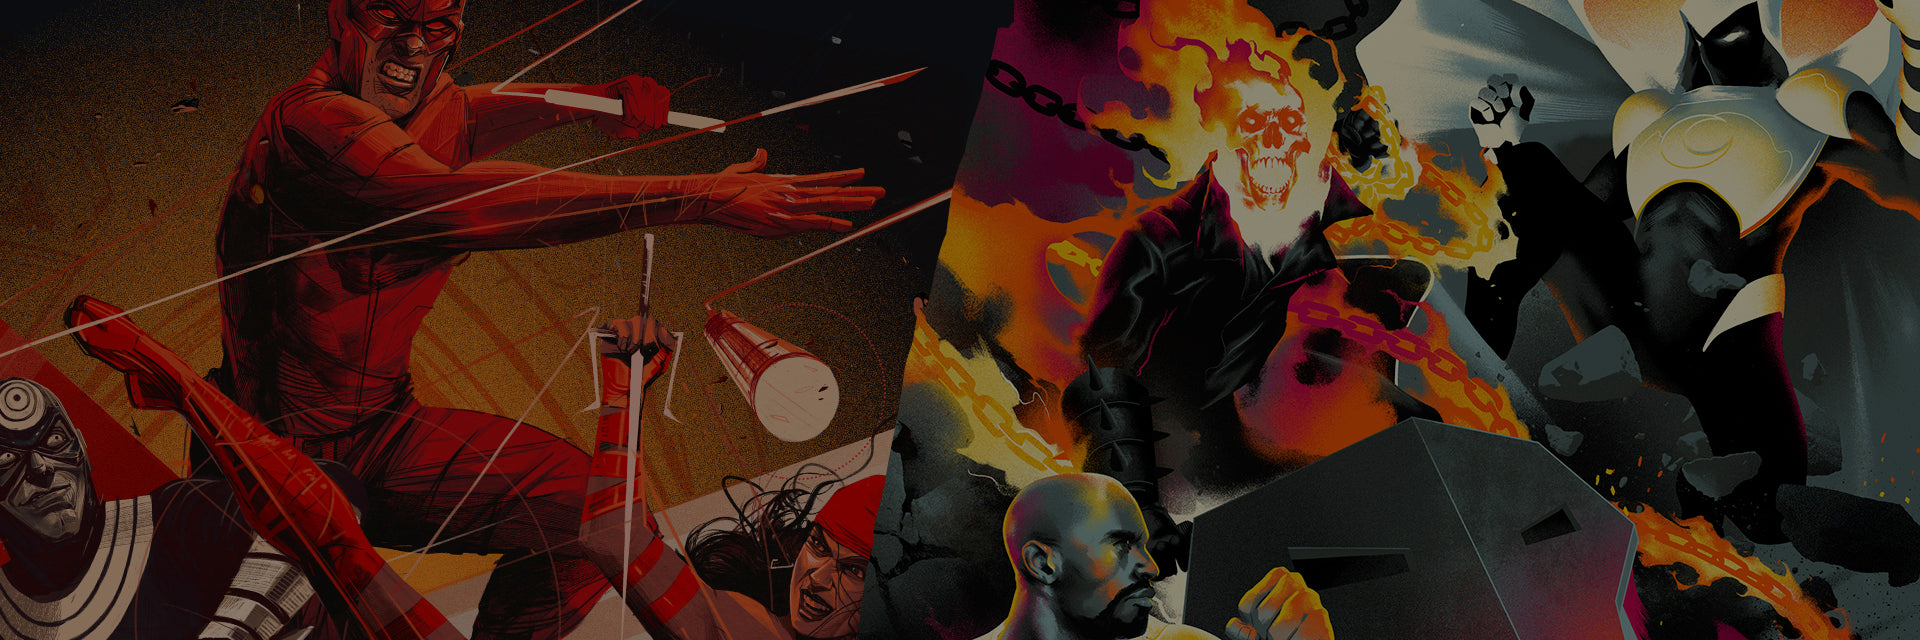 4 New Marvel-Themed UNMATCHED Game Titles Coming from Mondo / Restorat